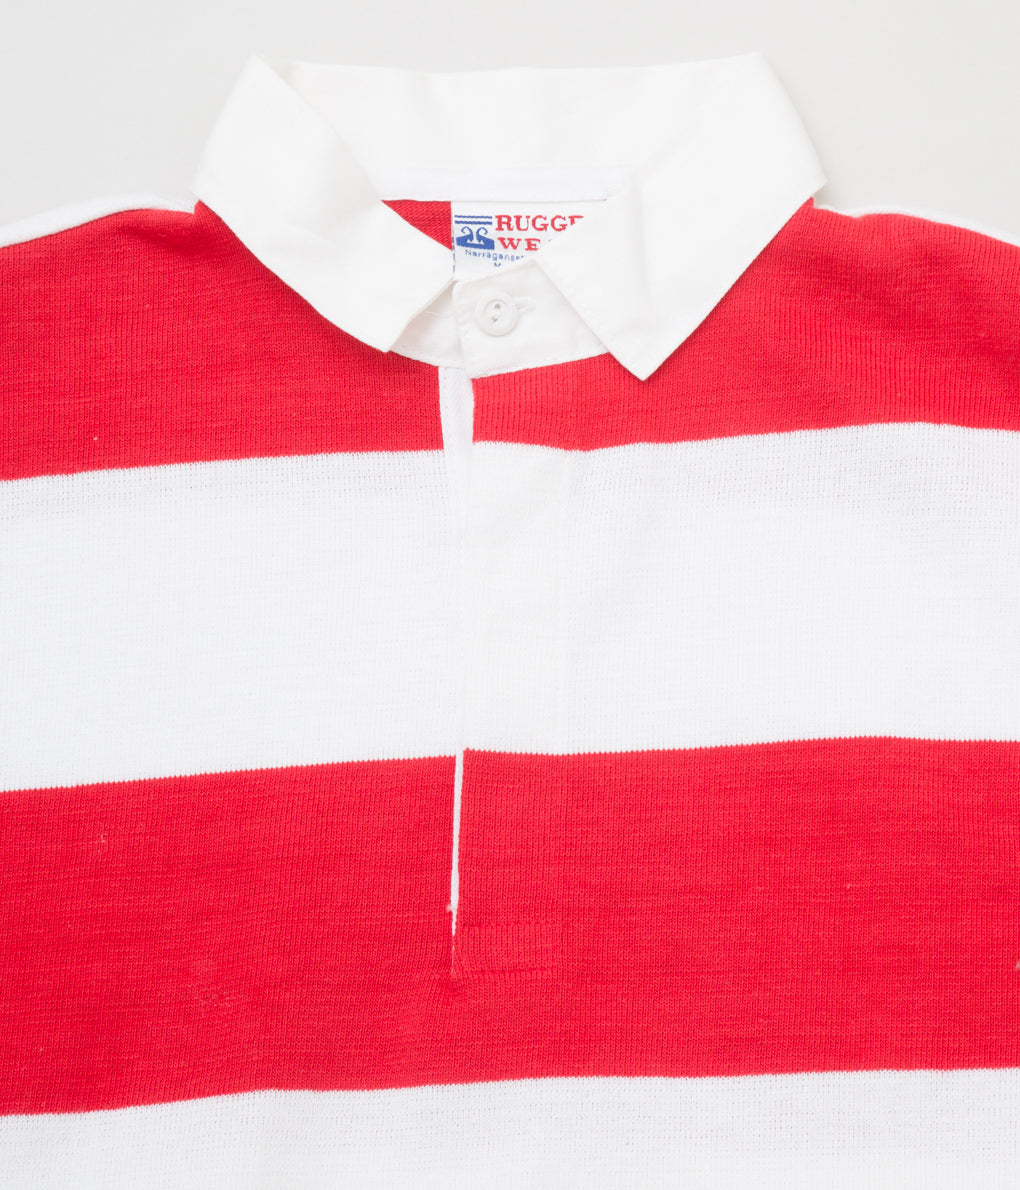 VINTAGE "80'S DEADSTOCK RUGGED WEAR RUGBY SHIRT" (WHITE/RED)